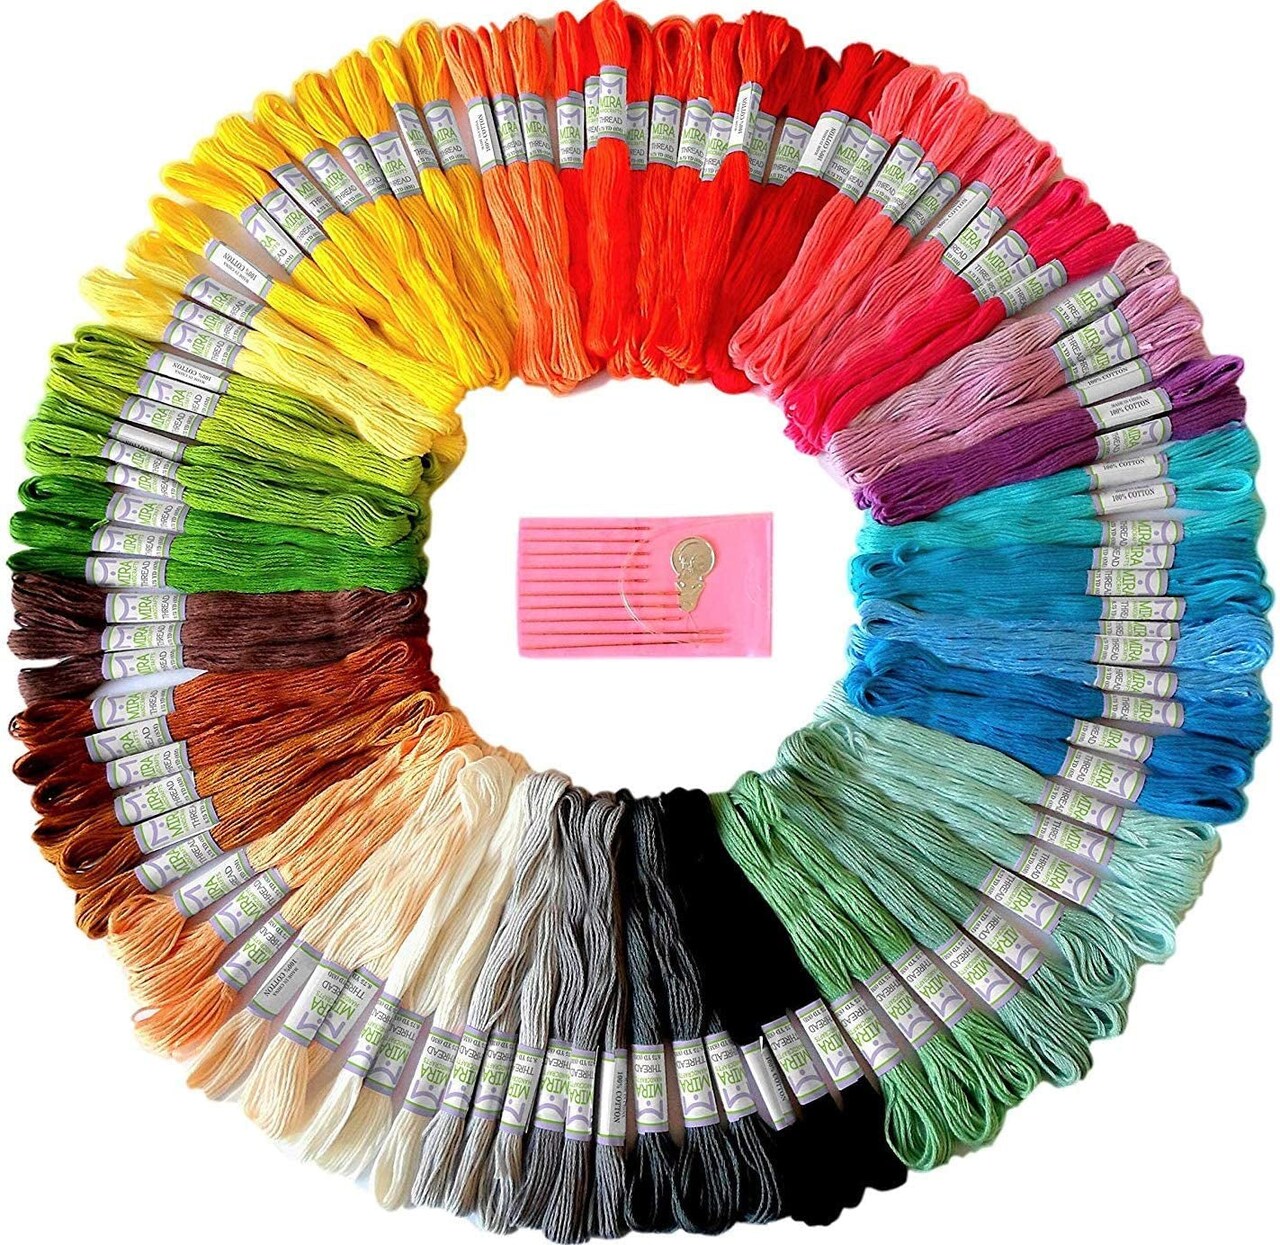 35 skeins Cross Stitch Floss Embroidery Threads